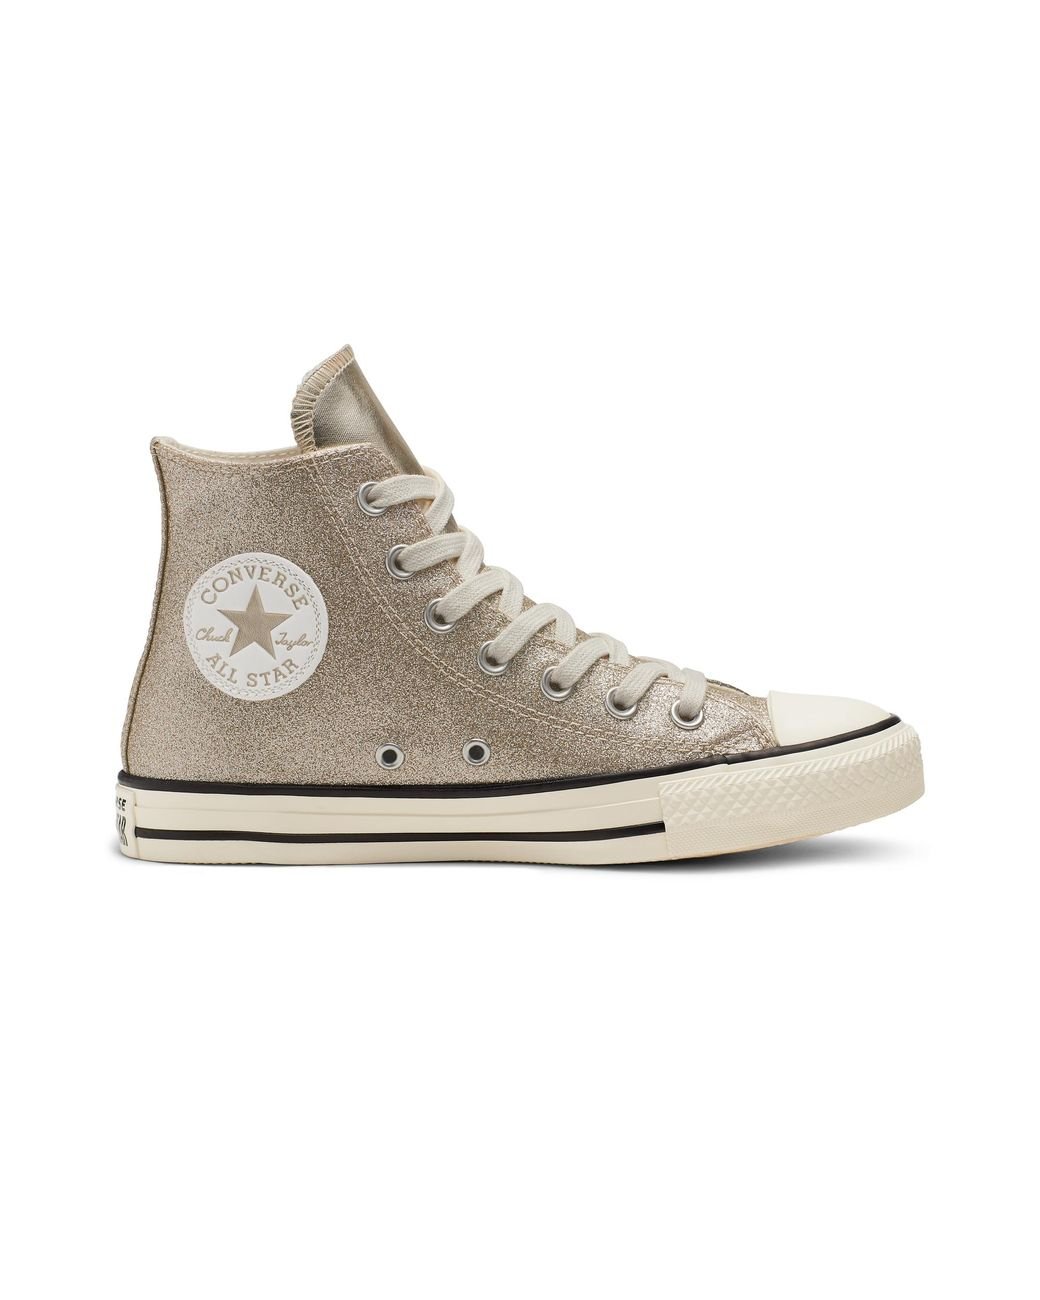 Converse Synthetic Chuck Taylor All Star Shiny Metal High Top in Gold  (Metallic) | Lyst